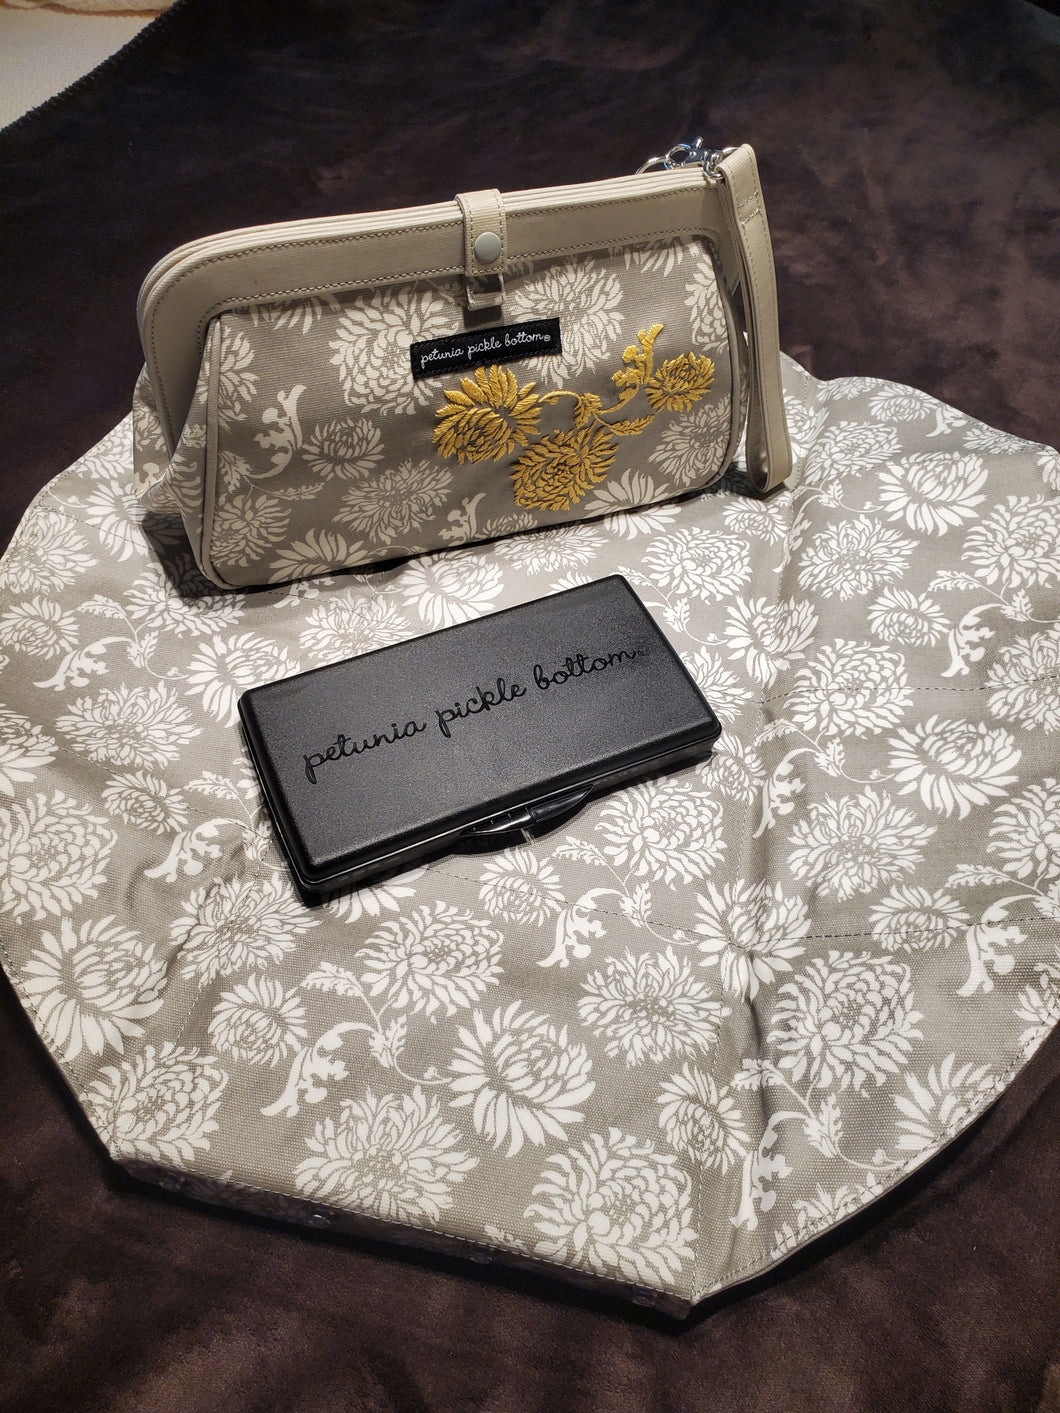 Petunia Pickle Bottom gray and yellow floral diaper bag cross town clutch wristlet